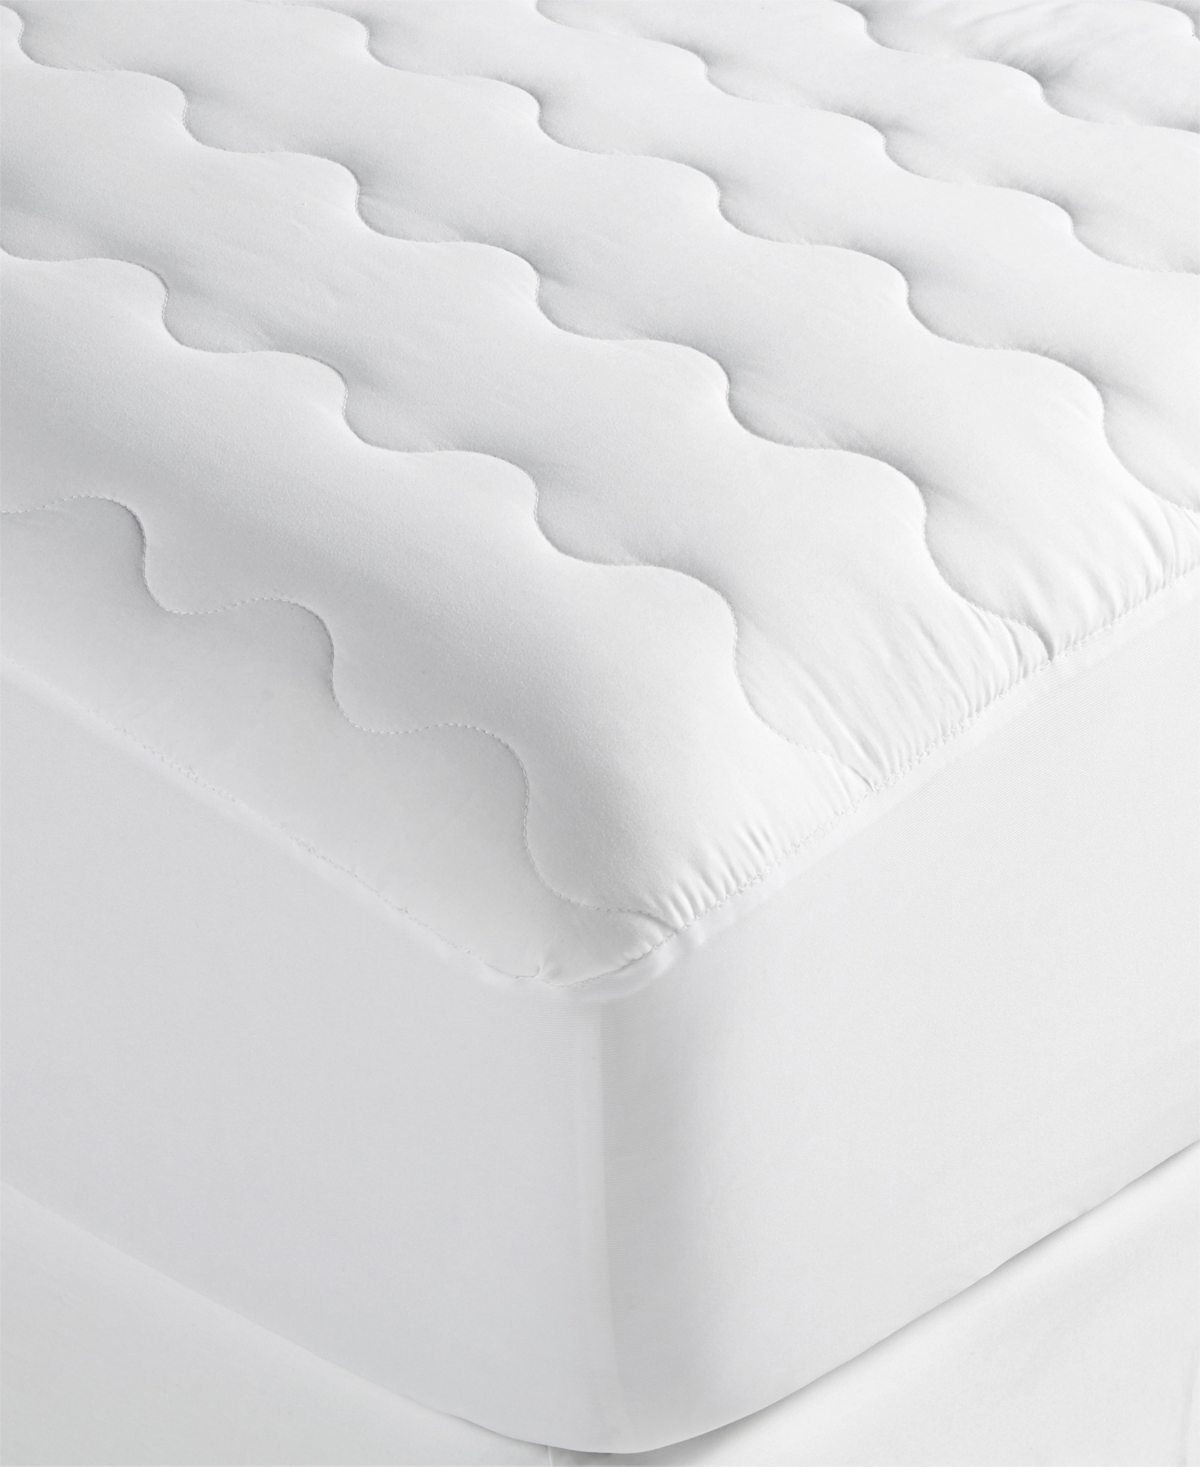 Home Design Easy Care Waterproof Mattress Pads, Twin Xl, Created For Macy's In White